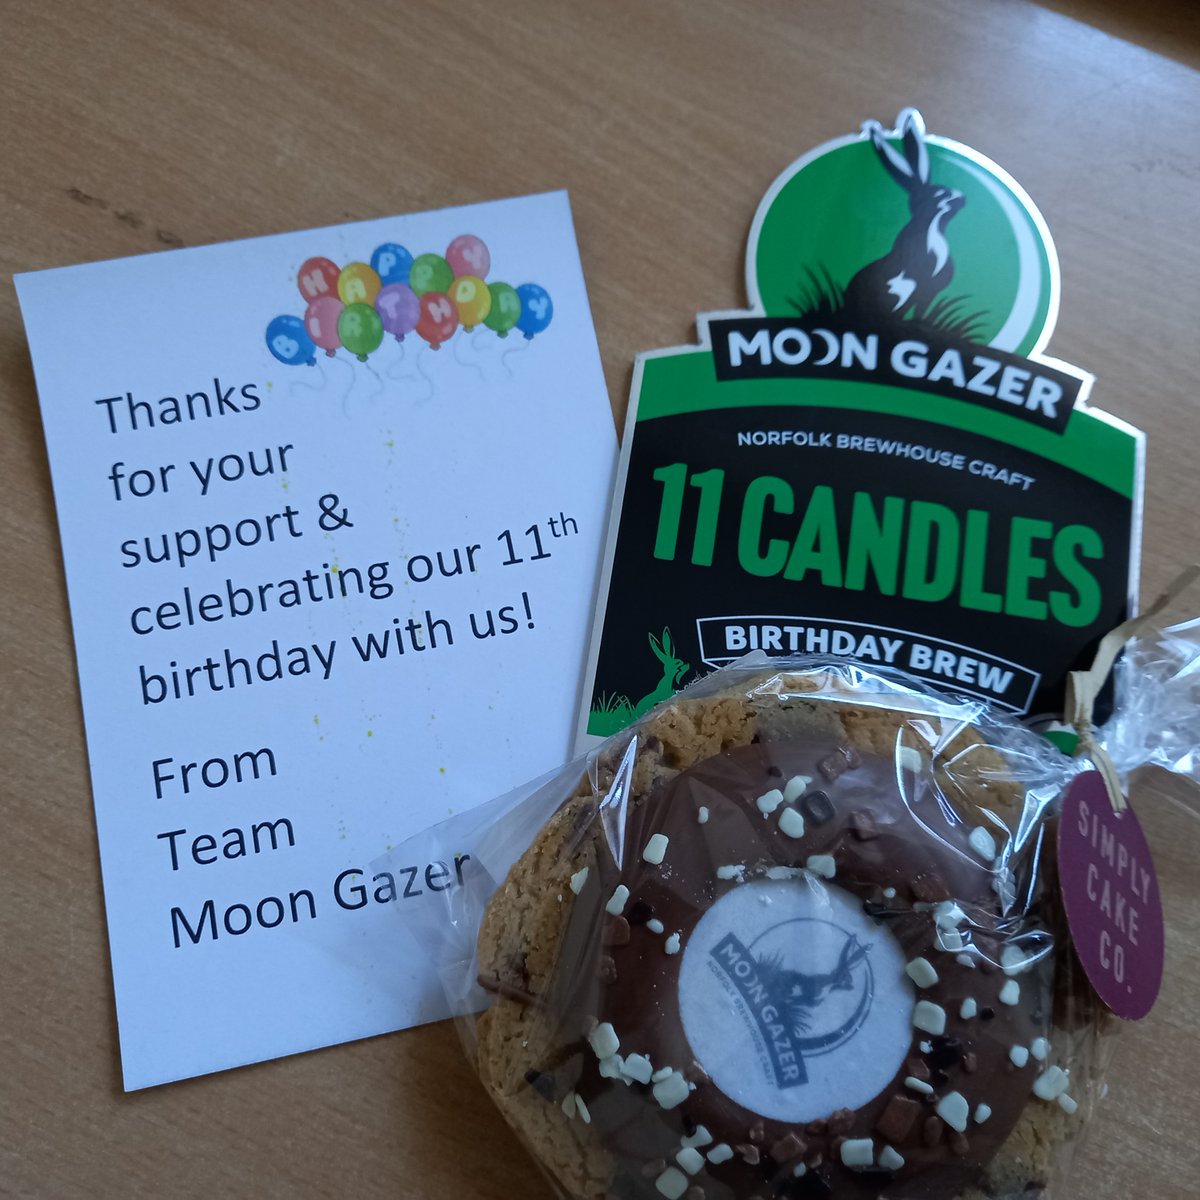 Our #birthdaybeer is heading out to pubs with a special tasty thank you from team #moongazer , hand made by #simplycakeco . Enjoy and thank you for your support, we really do appreciate it.